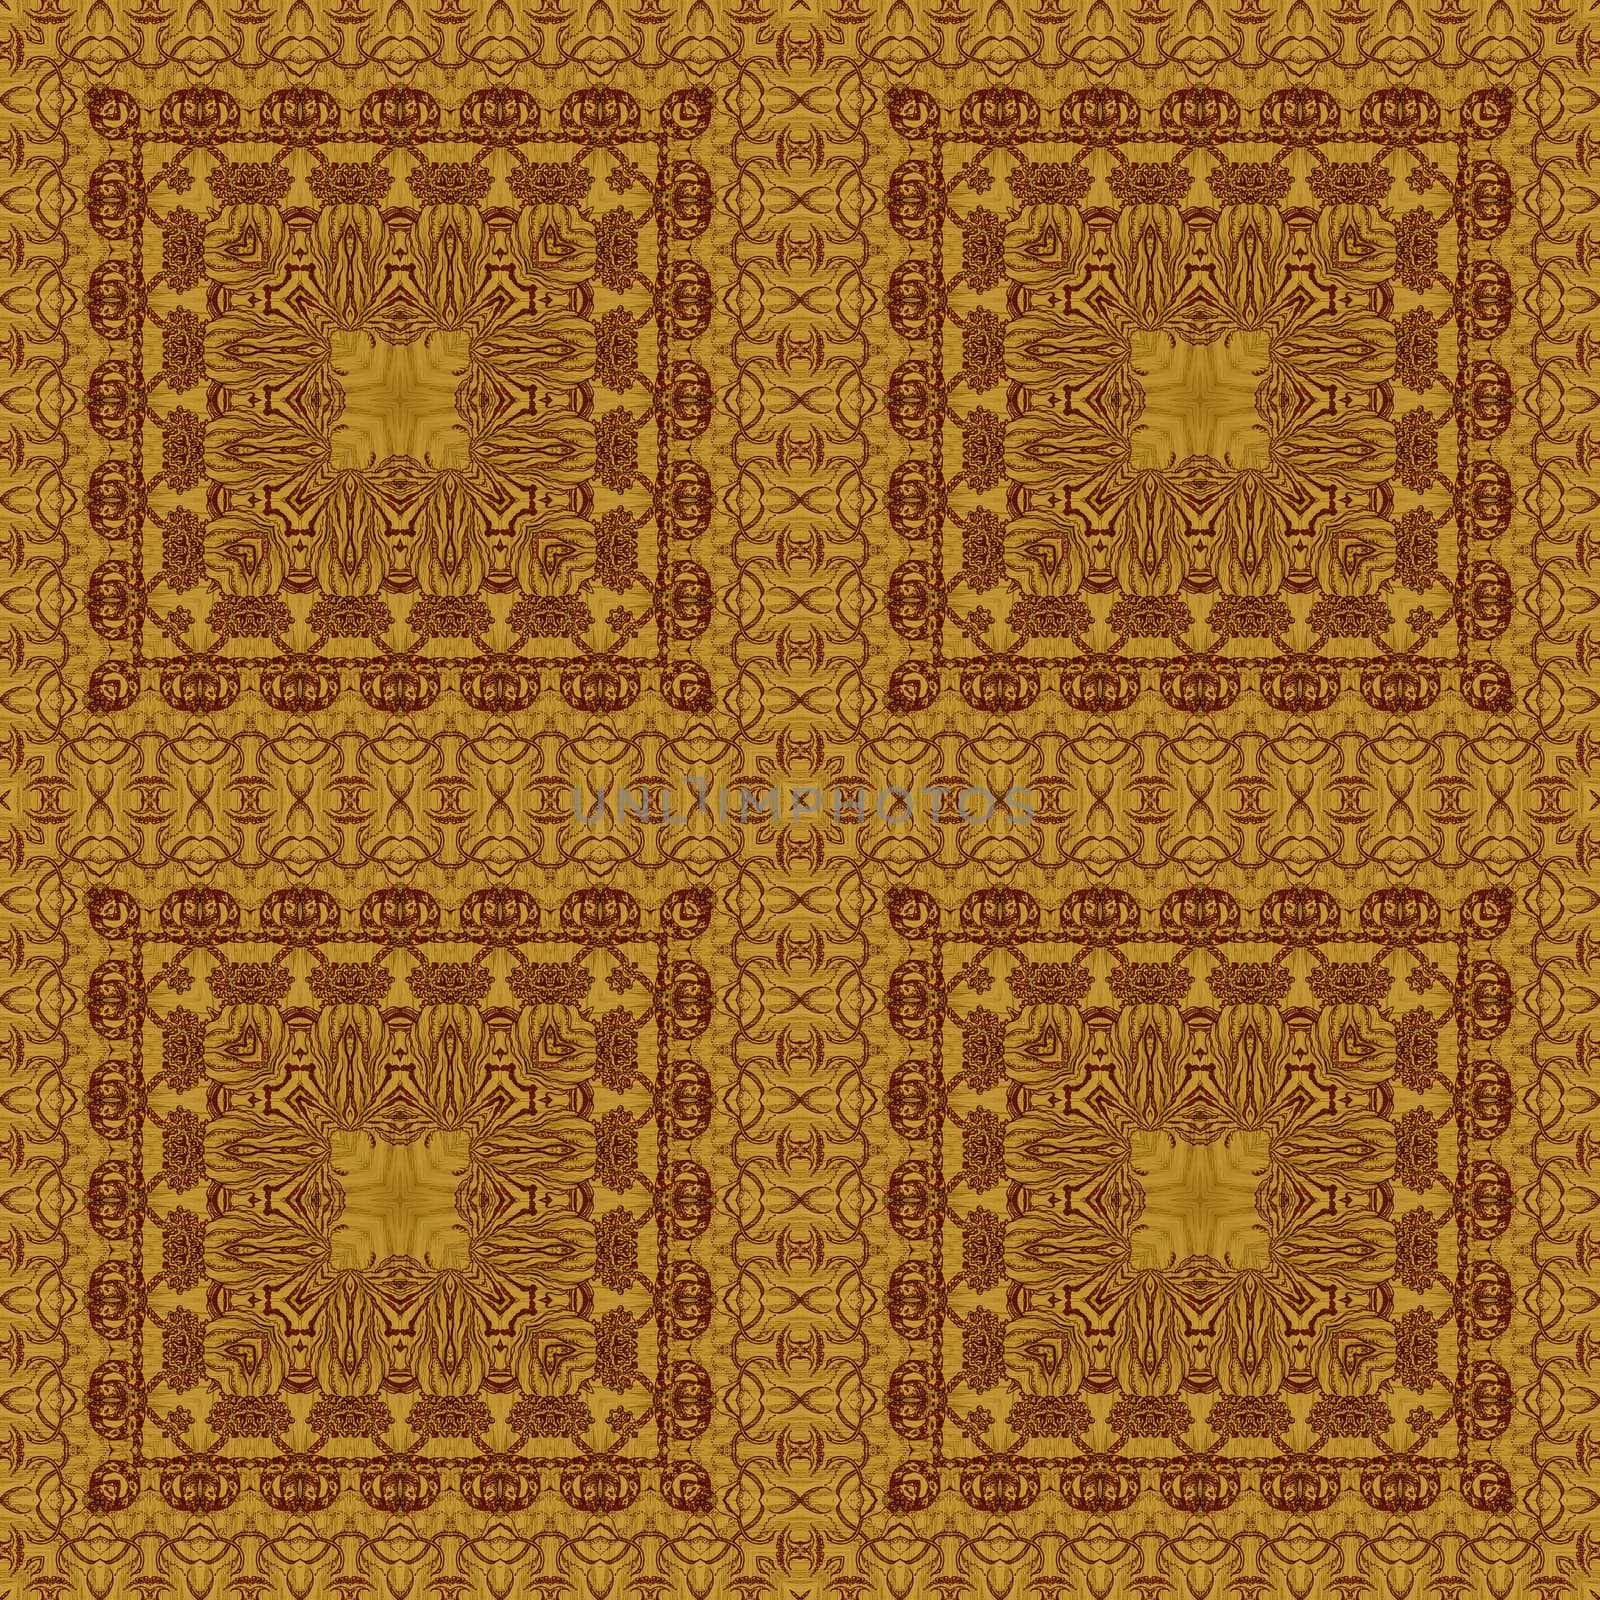 Seamless artistic background, abstract graphic pattern on wooden veneer